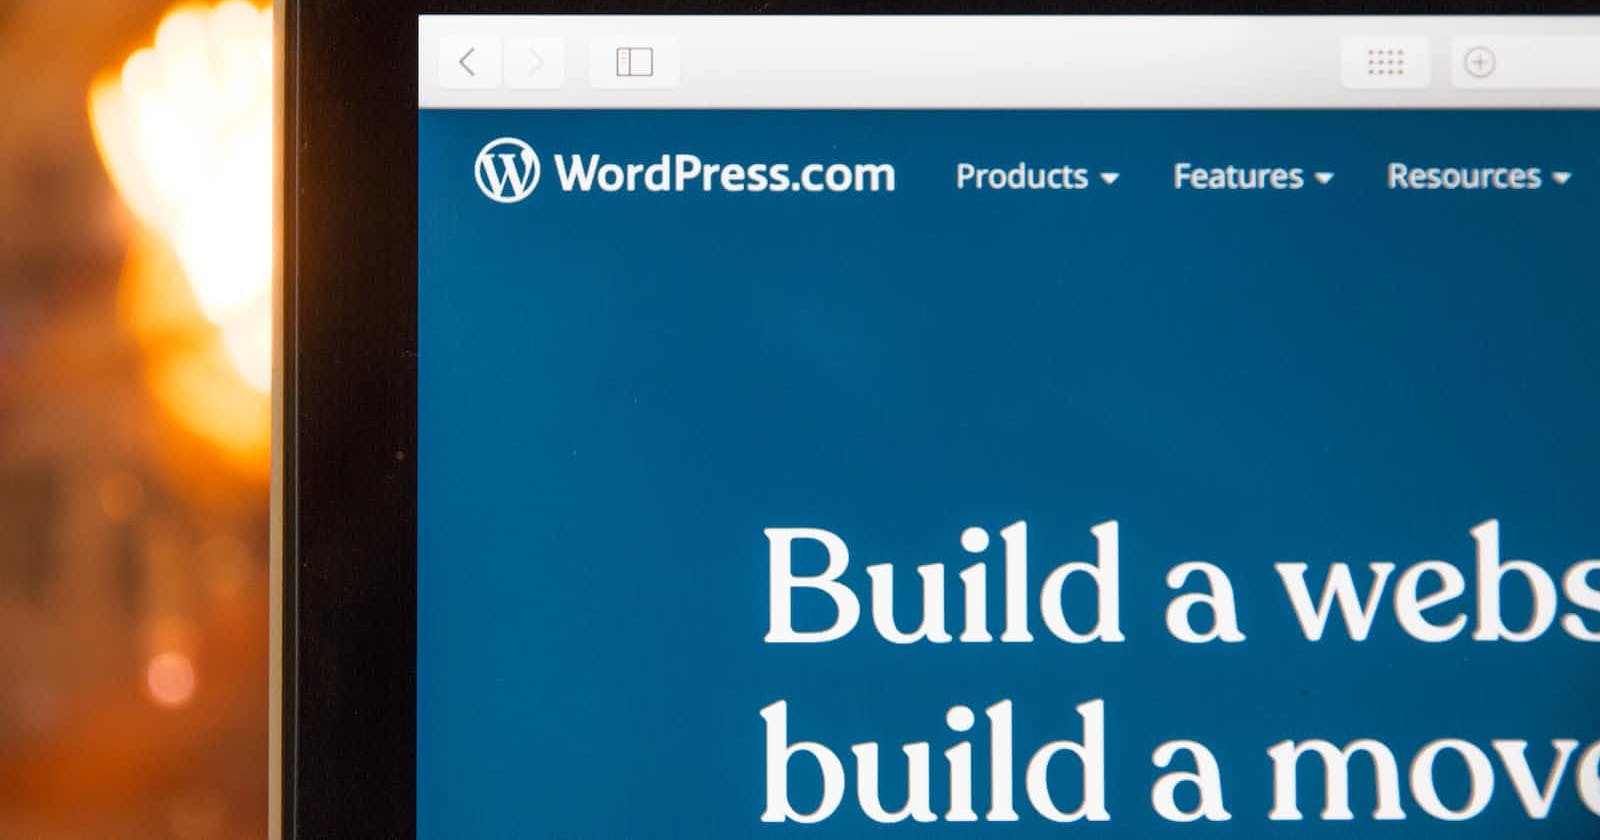 How to Check Which Theme a WordPress Site Uses